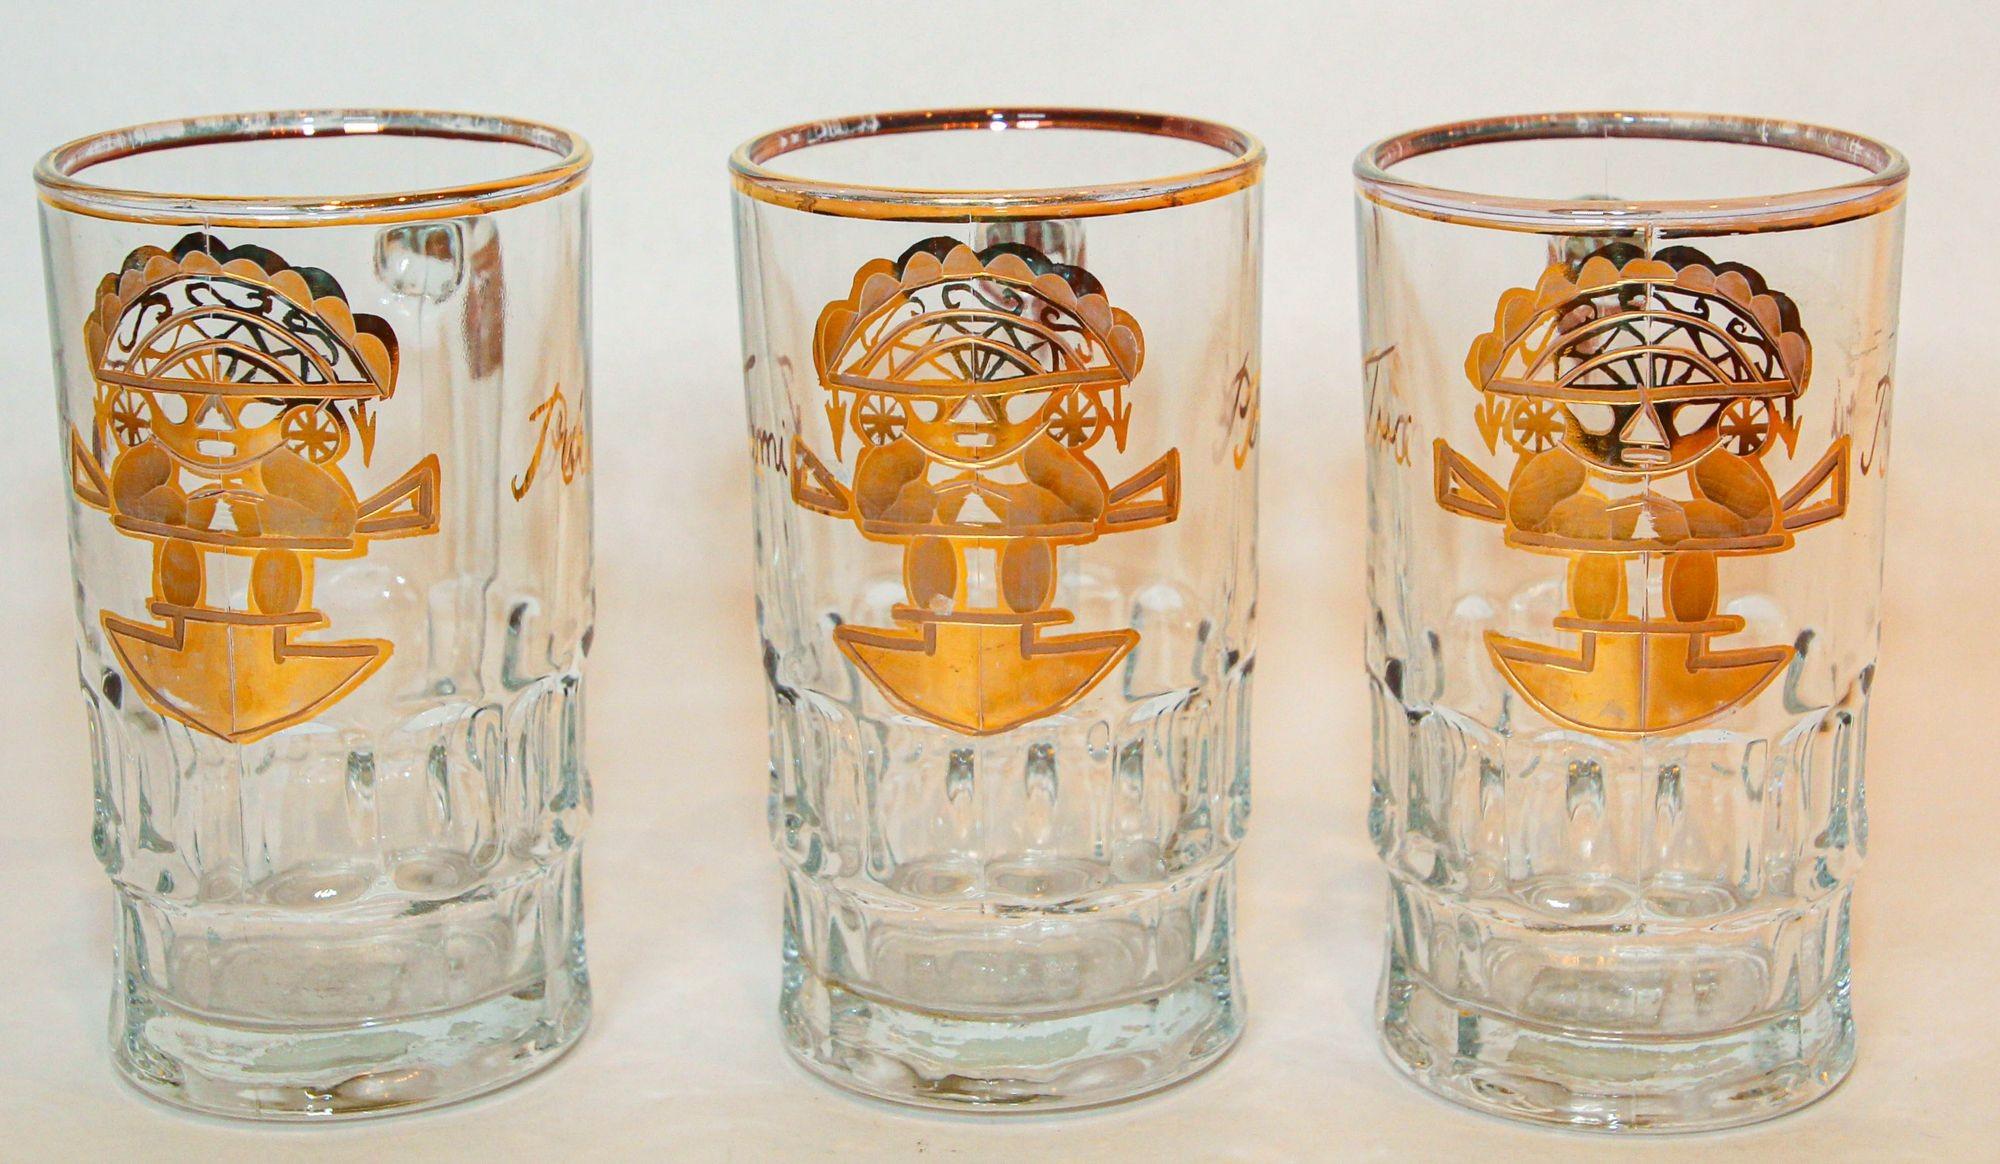 Vintage Artesania Tabuisa Tumi Peruvian God Gold Glass Mugs Set of 3.
Set up the Tiki Bar and serve your favorite drink or beer, featuring an Aztec Tumi God.
The graphic is so striking and very modernist.
There are Inca God figure design in front of